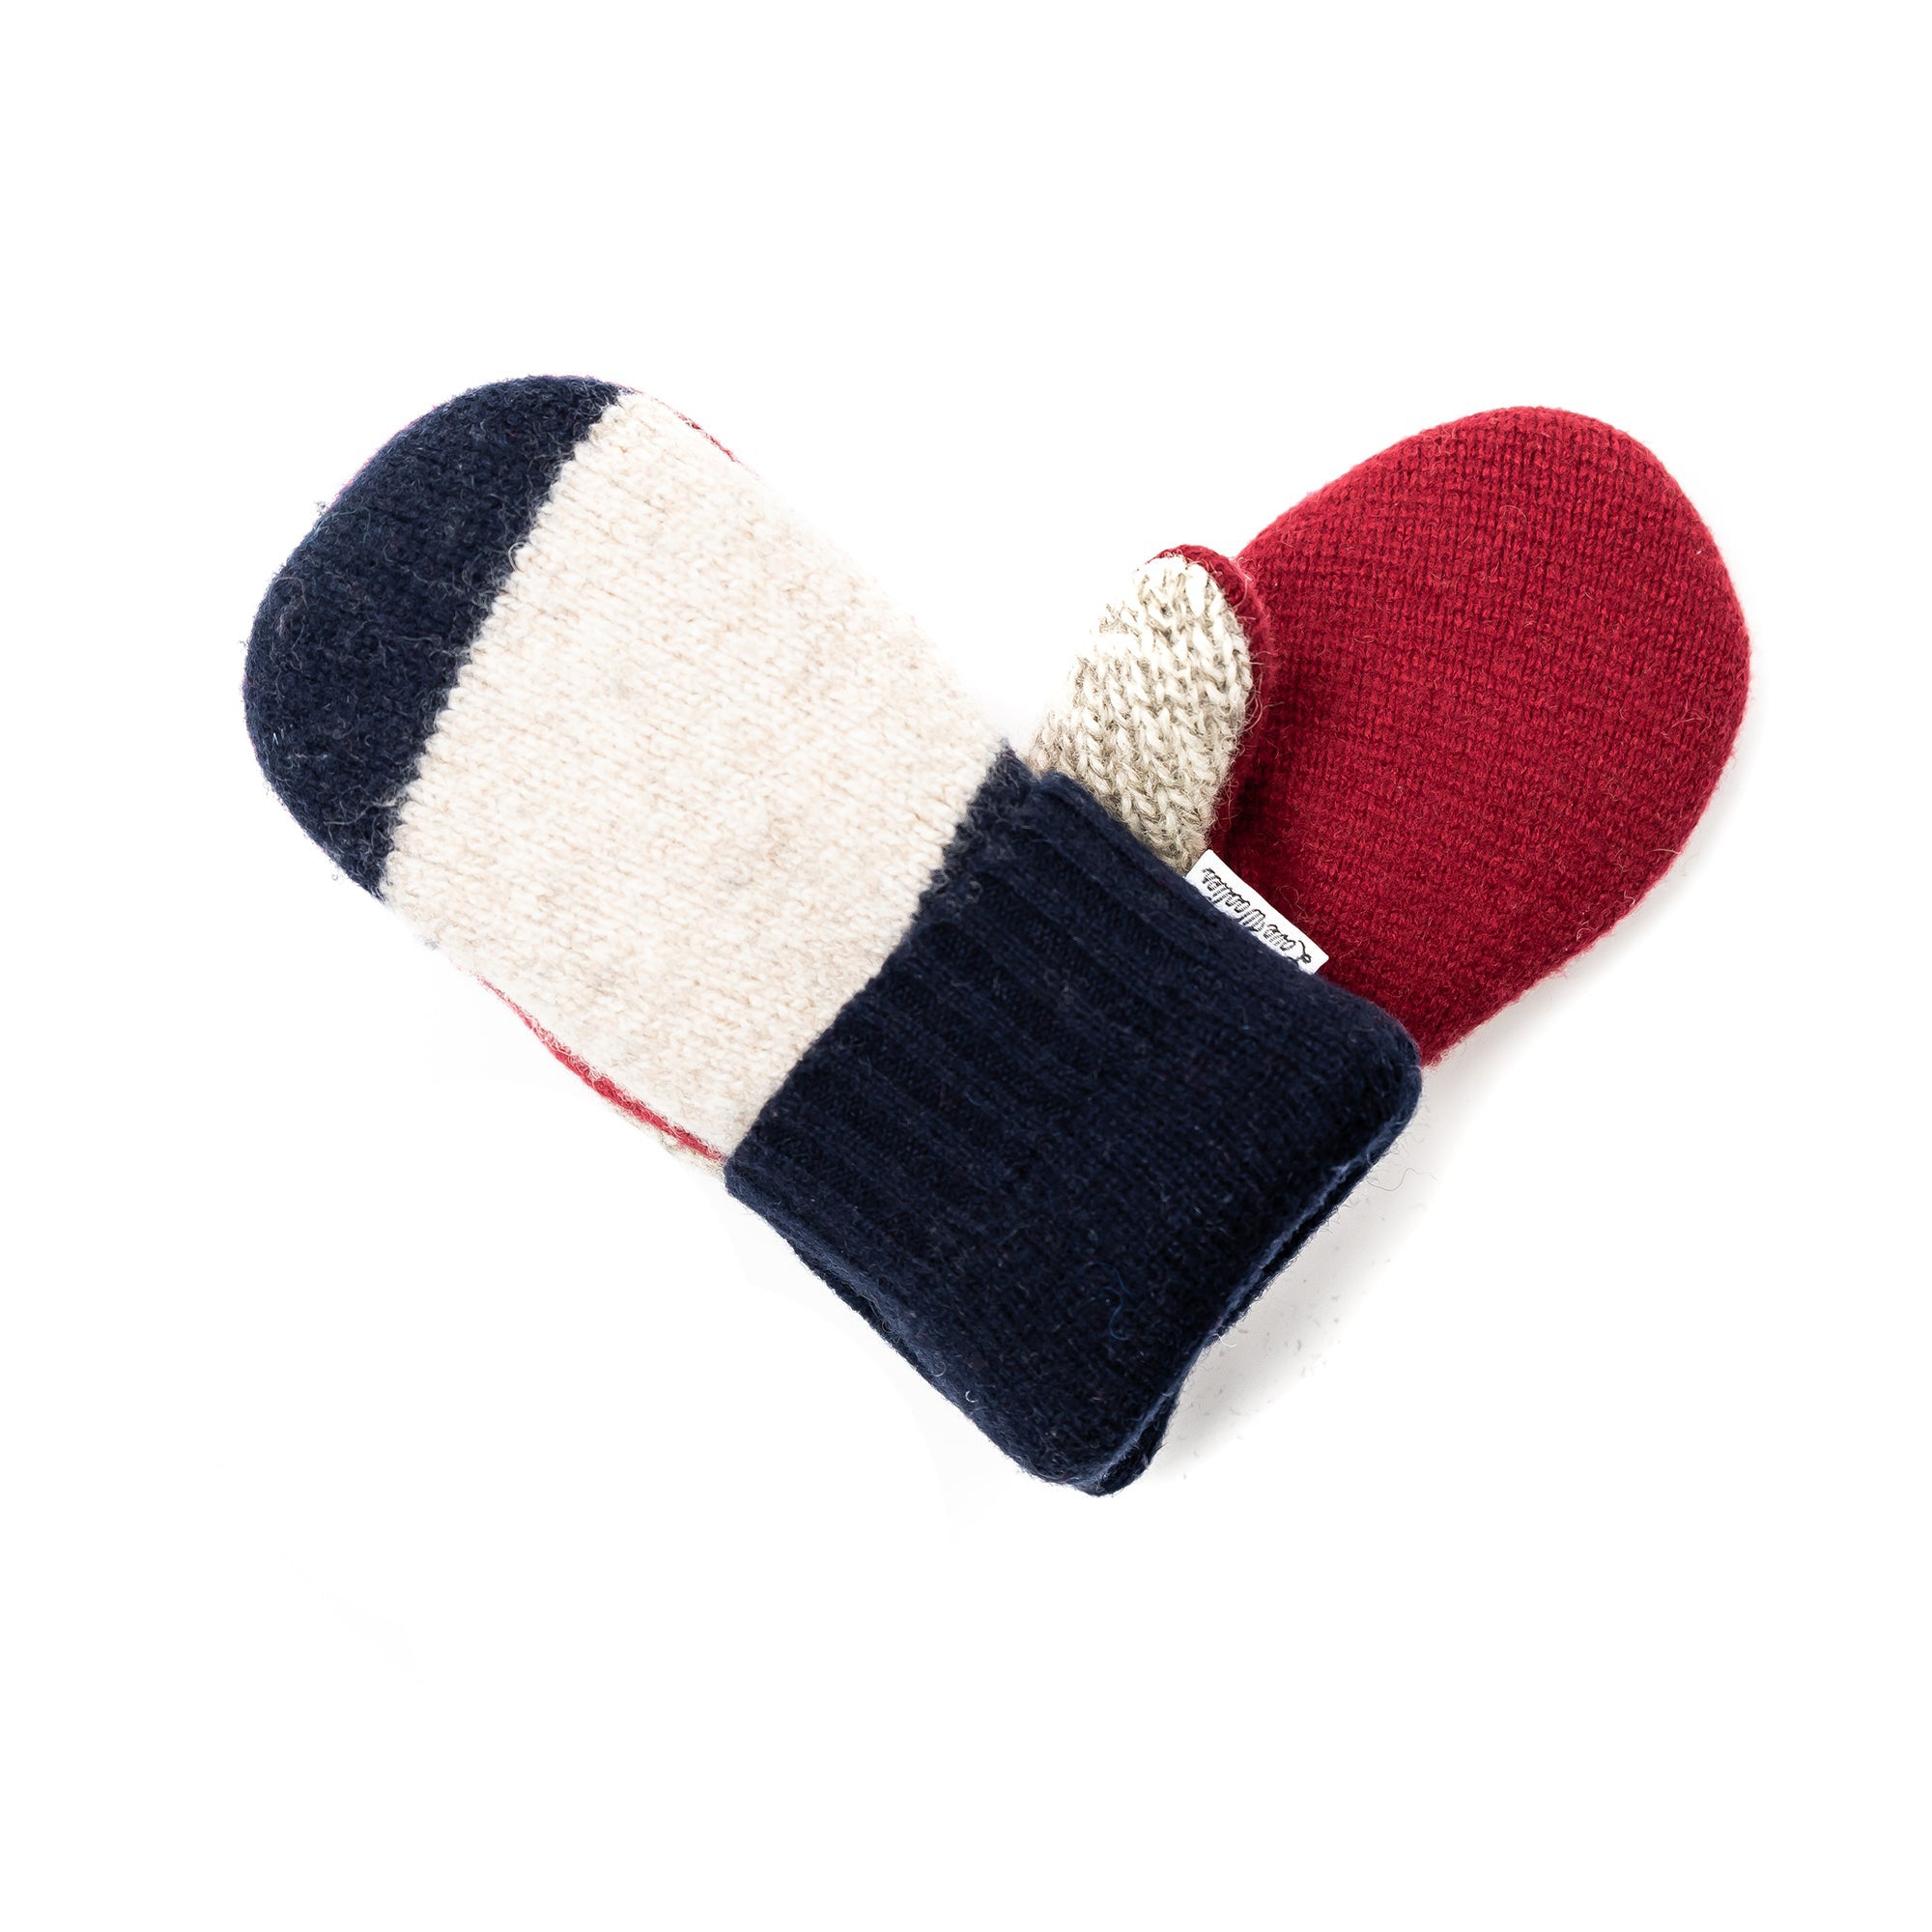 Small Kid's Wool Sweater Mittens | Cuddle up